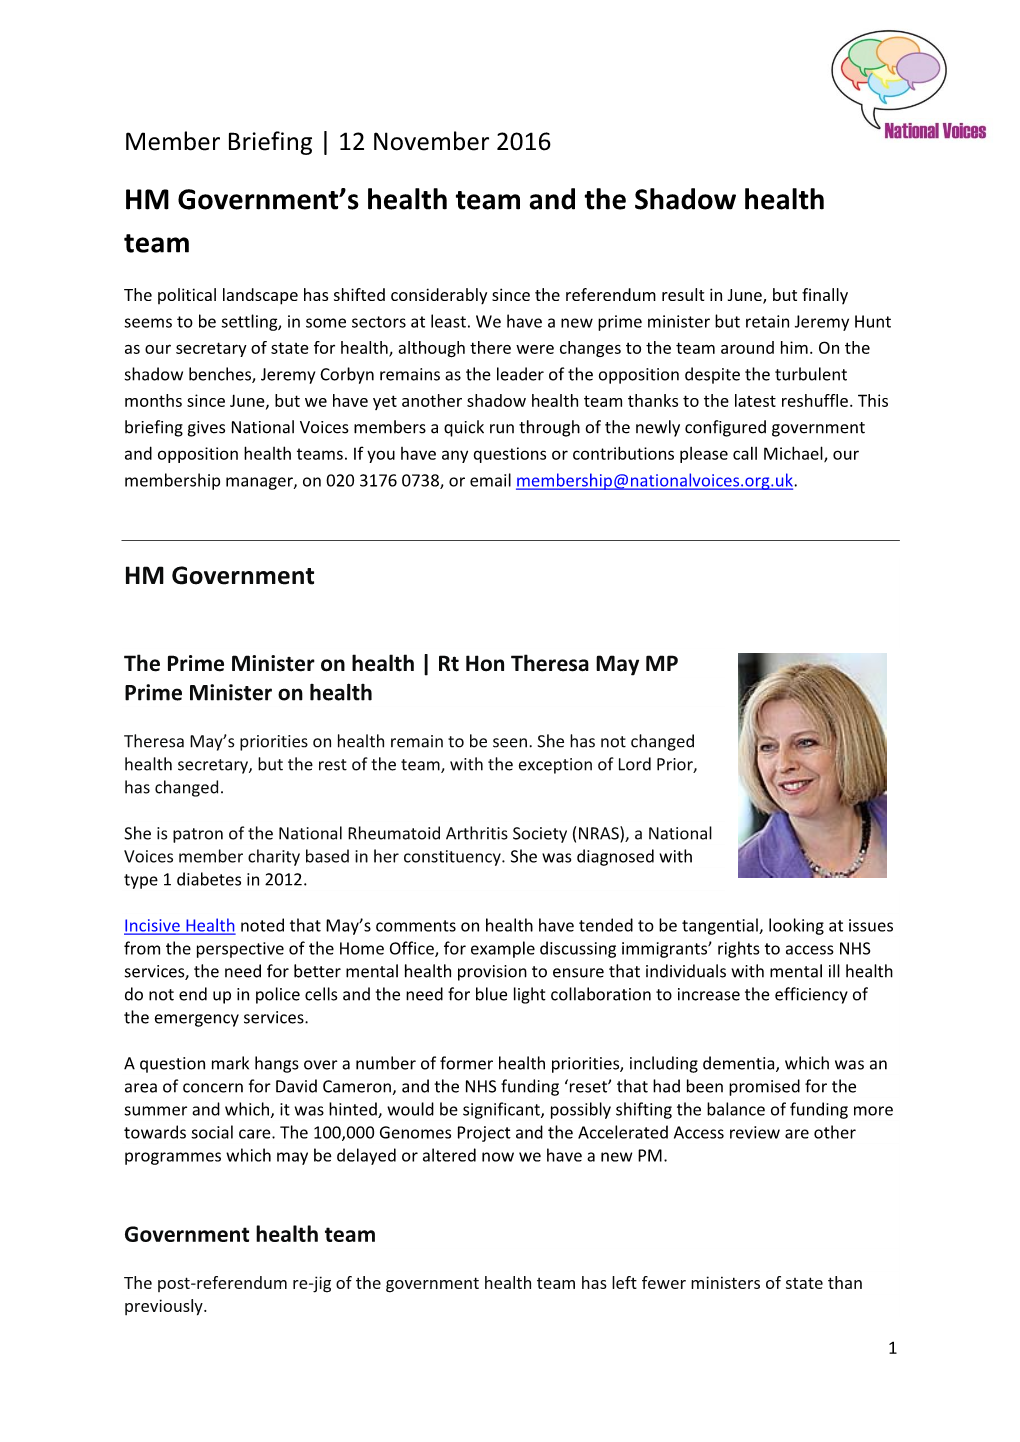 HM Government's Health Team and the Shadow Health Team